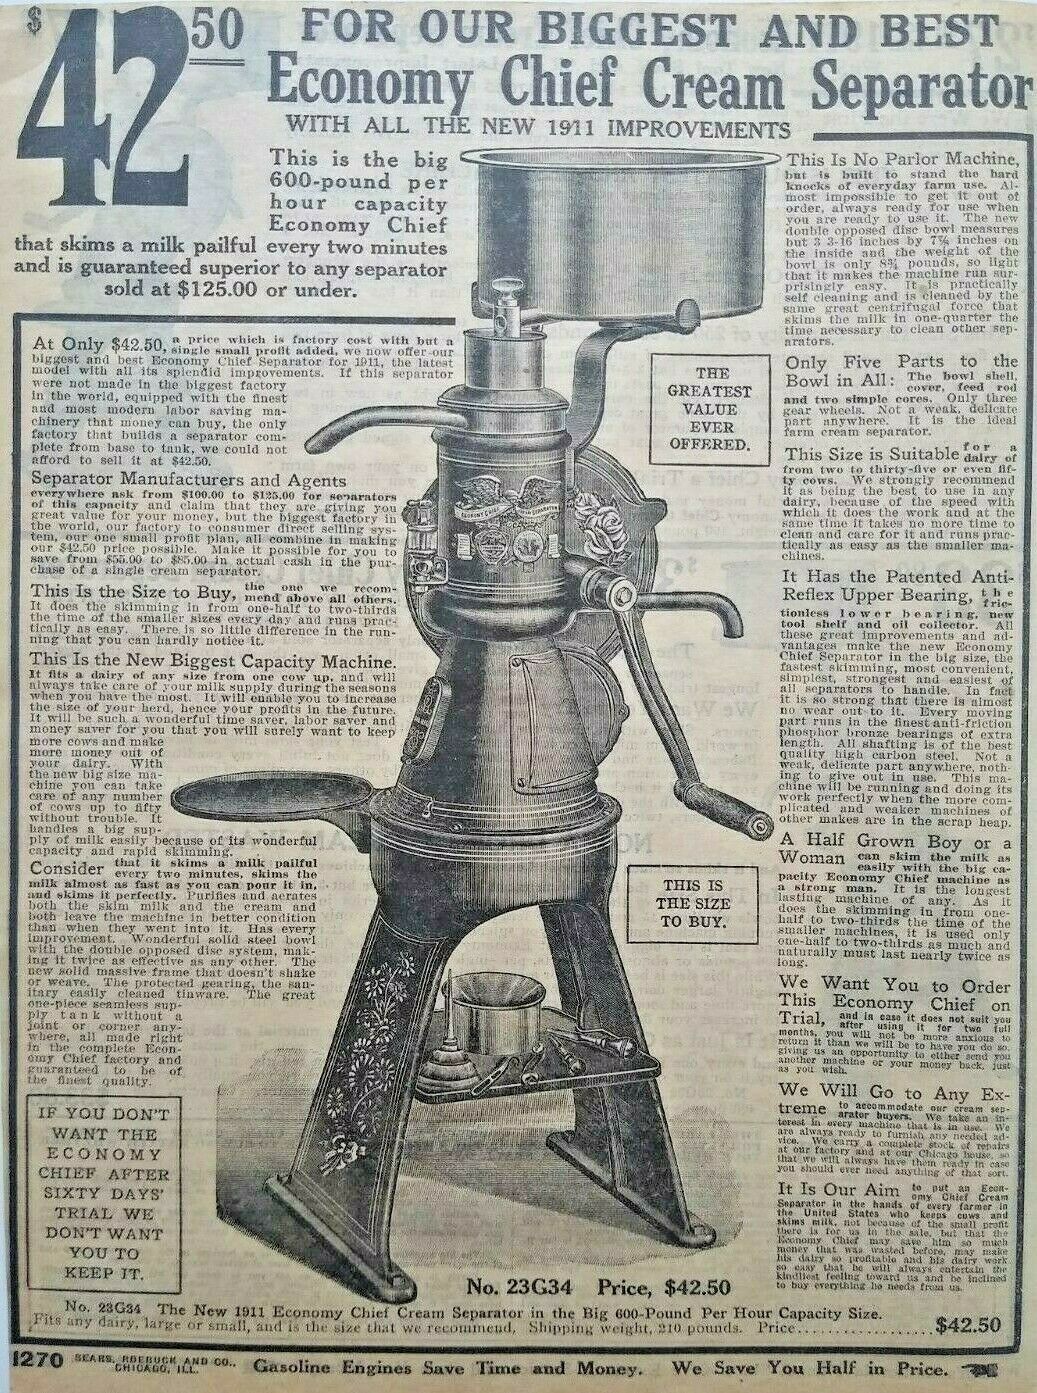 https://antiquemachinery.com/images-Cream-Separator/1911-Antique-Economy-Chief-Cream-Separator-Dairy-Art-Sears-Catalog-Page-Print-Ad.jpg